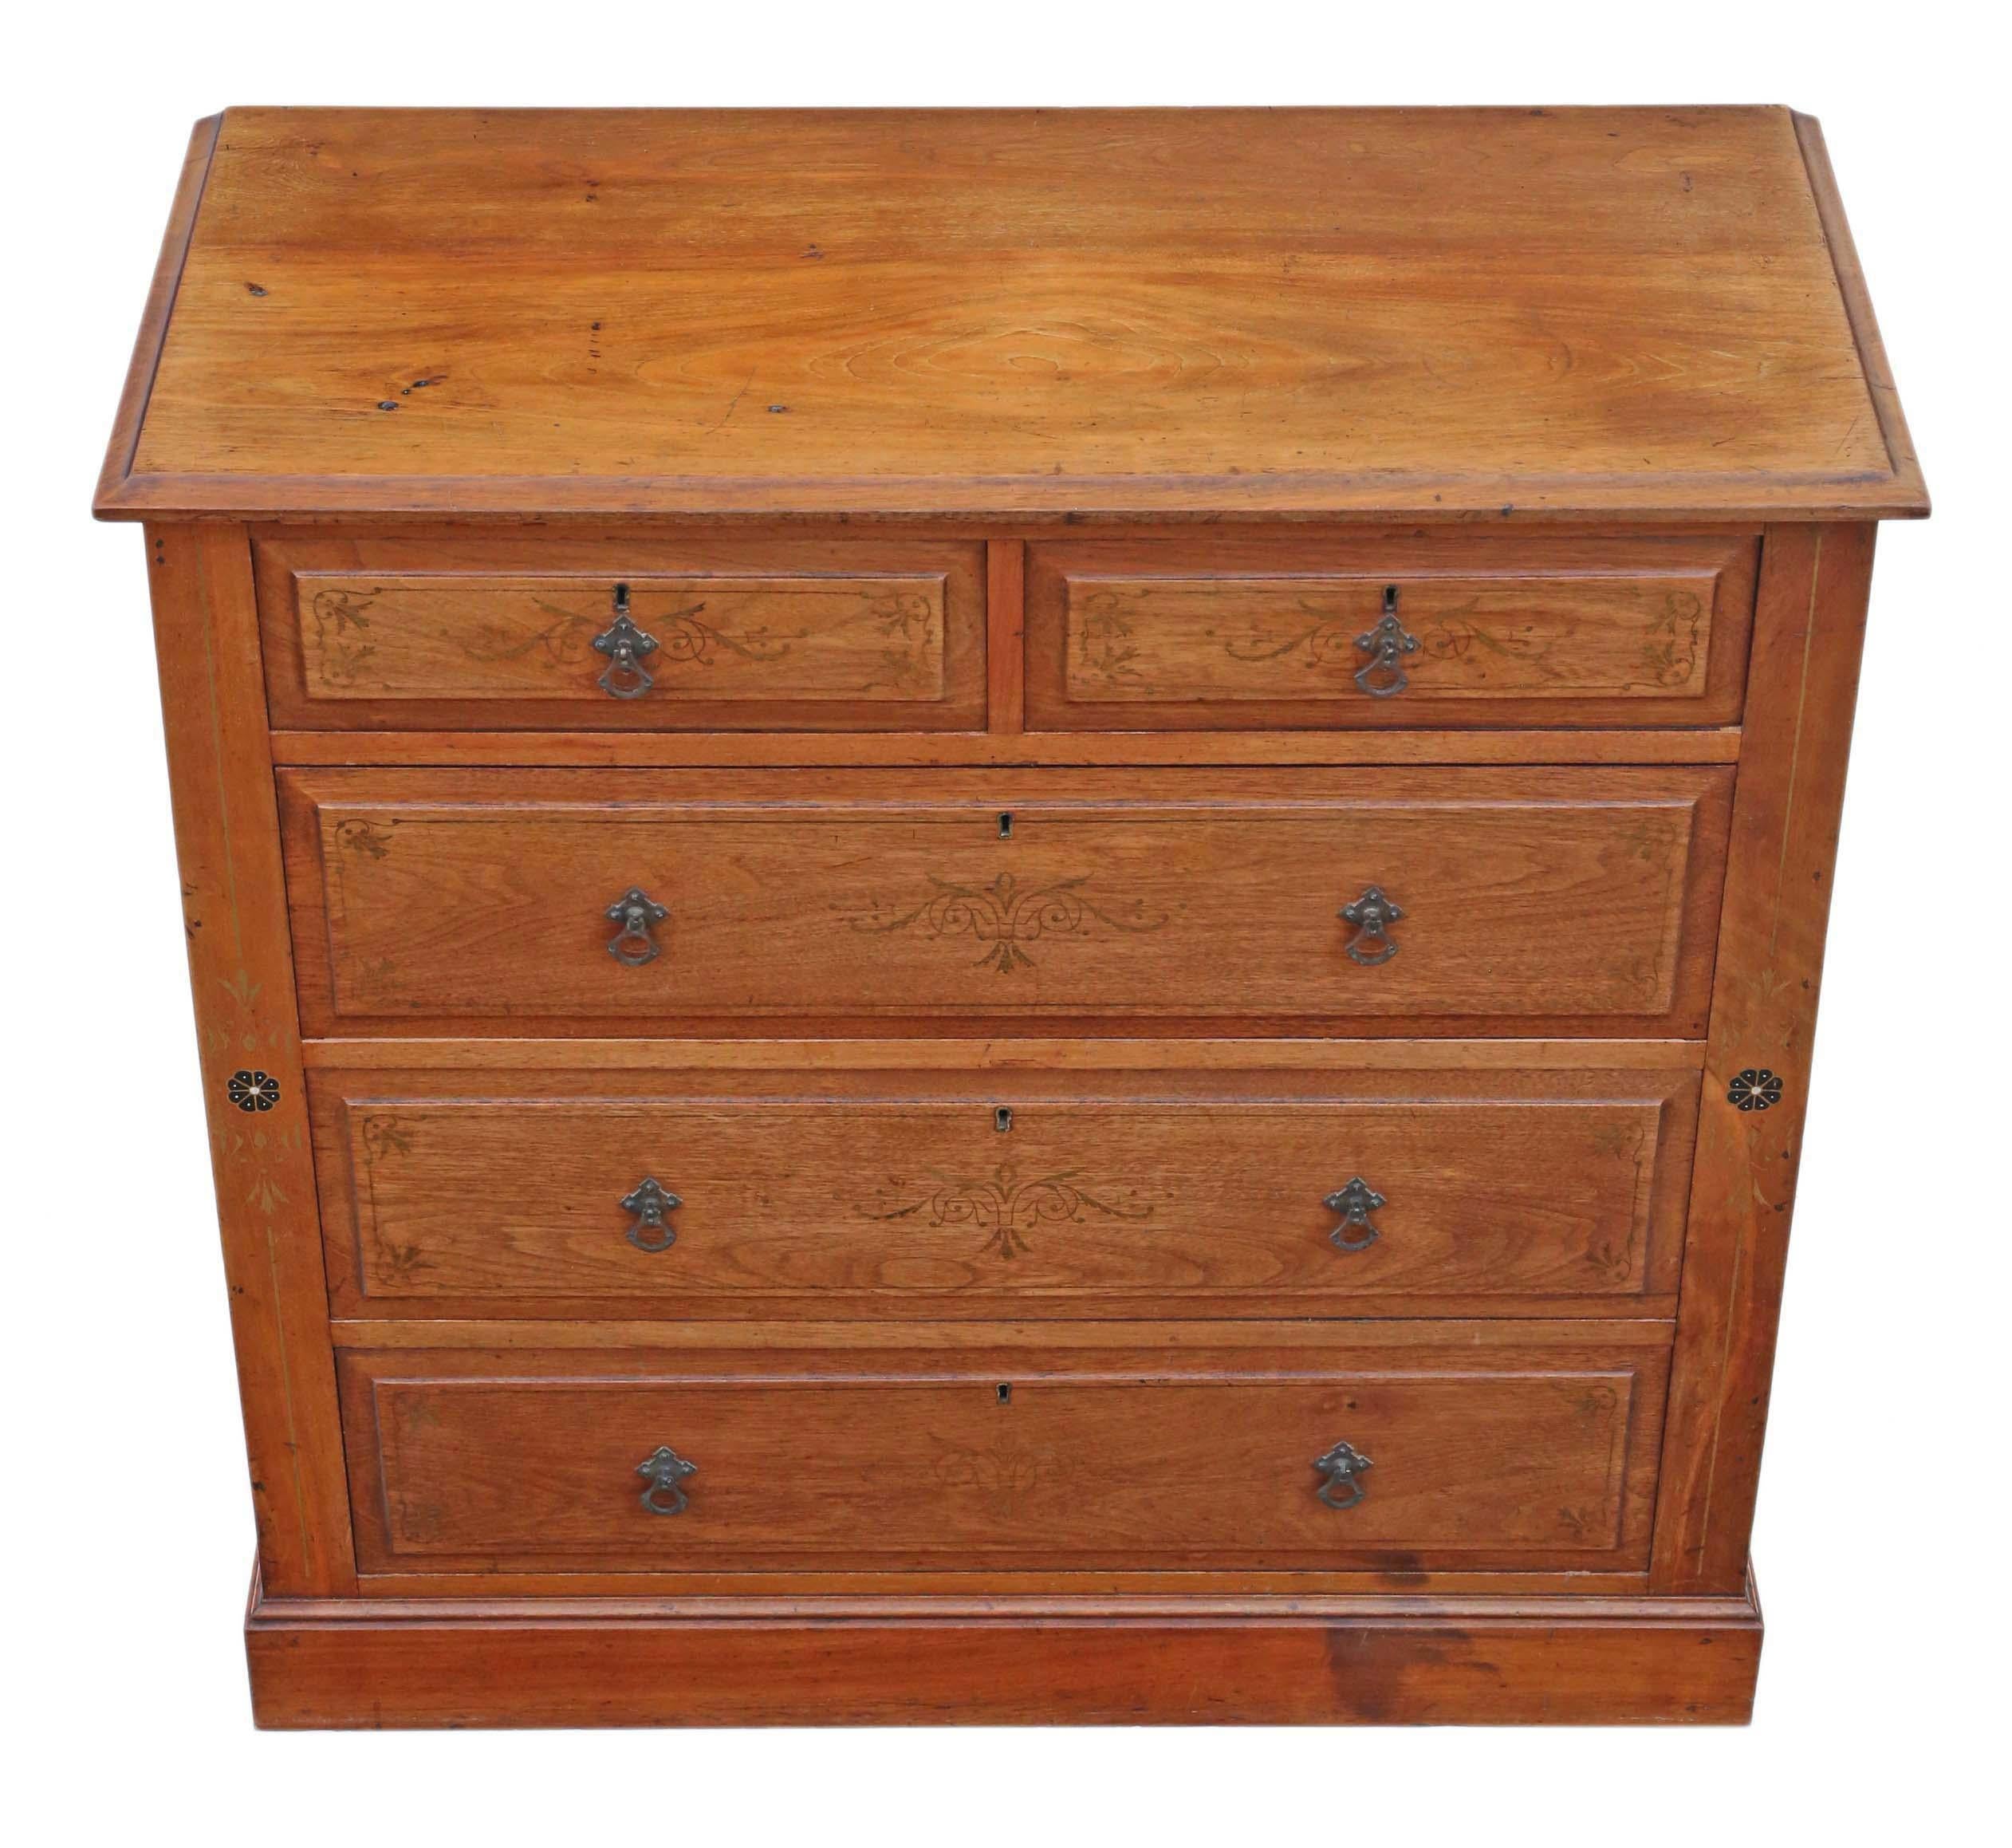 Antique fine quality Victorian C 1895 decorated ash chest of drawers.

Great rare item, which is solid and heavy with no loose joints or woodworm. Lovely decoration and Aesthetic Victorian styling.

Good age, colour and patina. The drawers slide